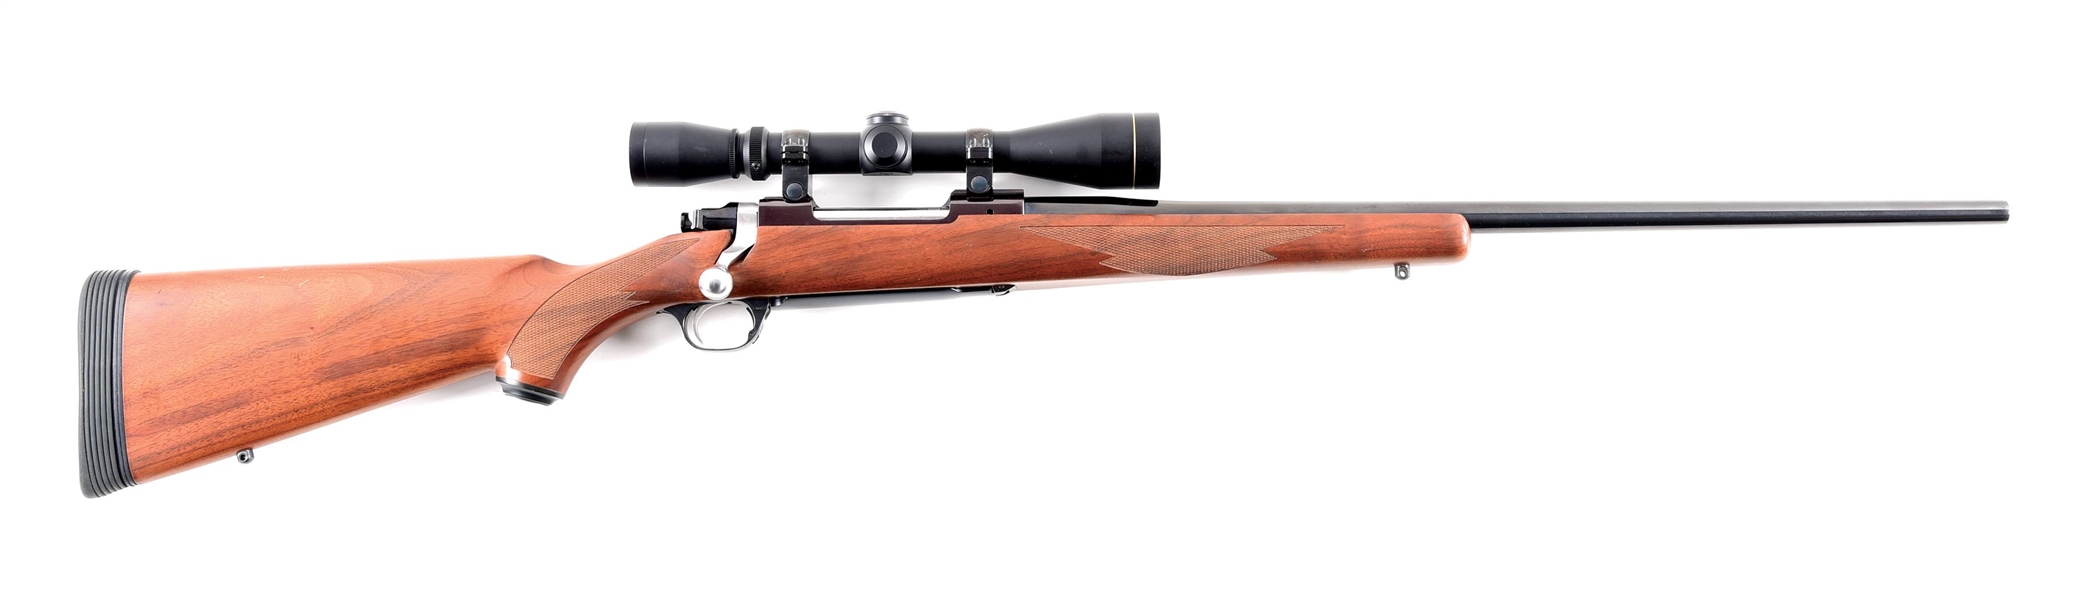 (M) RUGER MODEL 77 BOLT ACTION RIFLE IN .300 WINCHESTER MAGNUM.